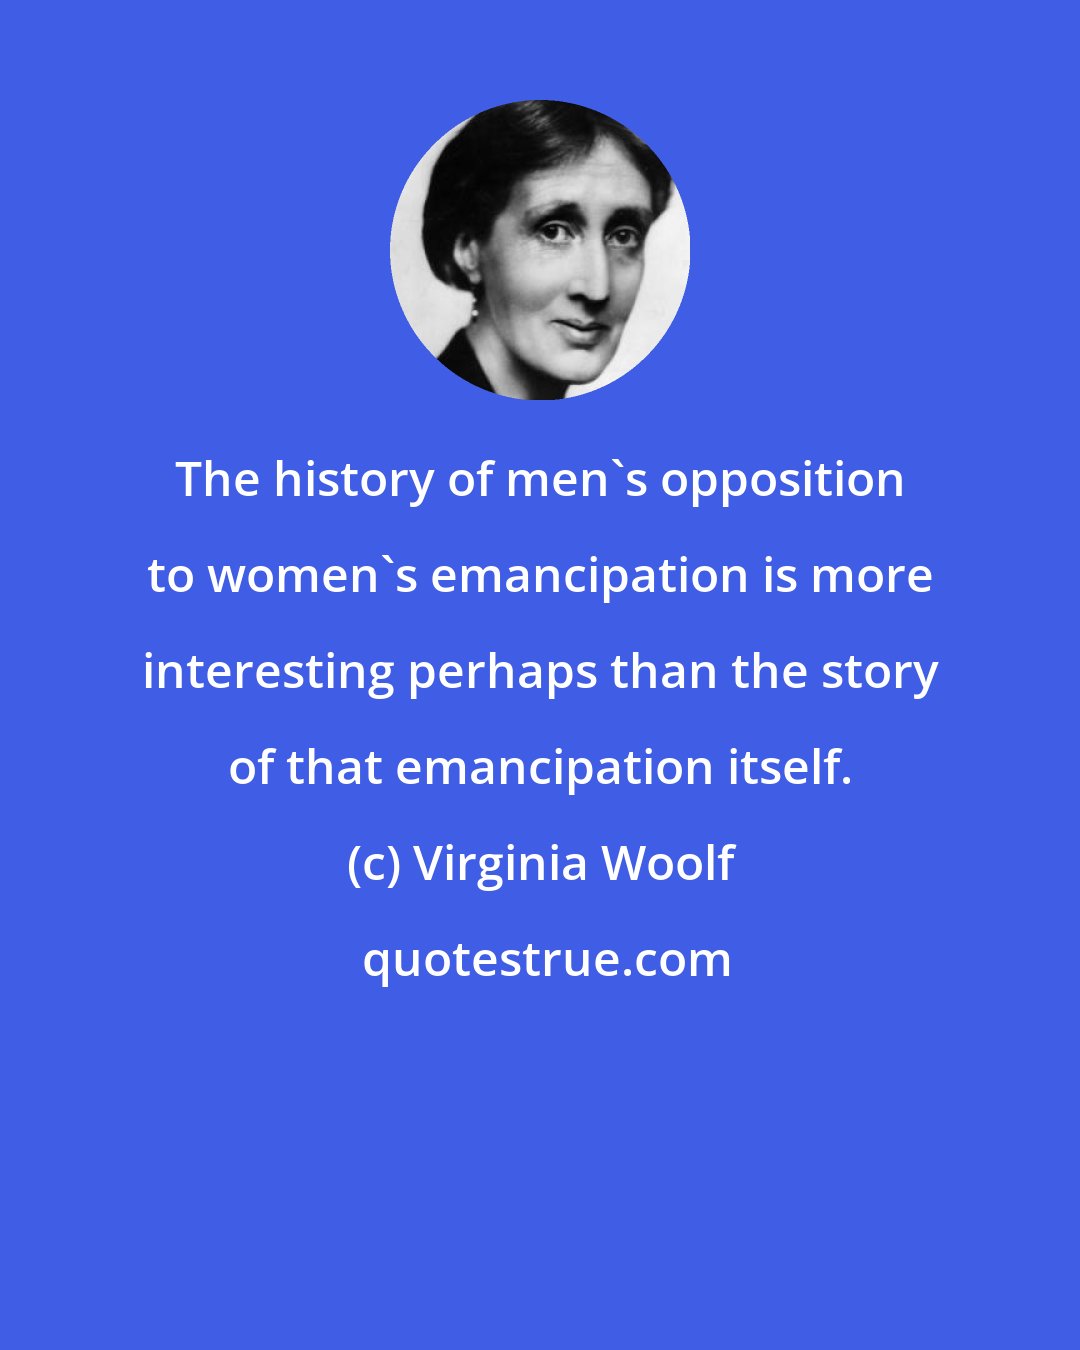 Virginia Woolf: The history of men's opposition to women's emancipation is more interesting perhaps than the story of that emancipation itself.